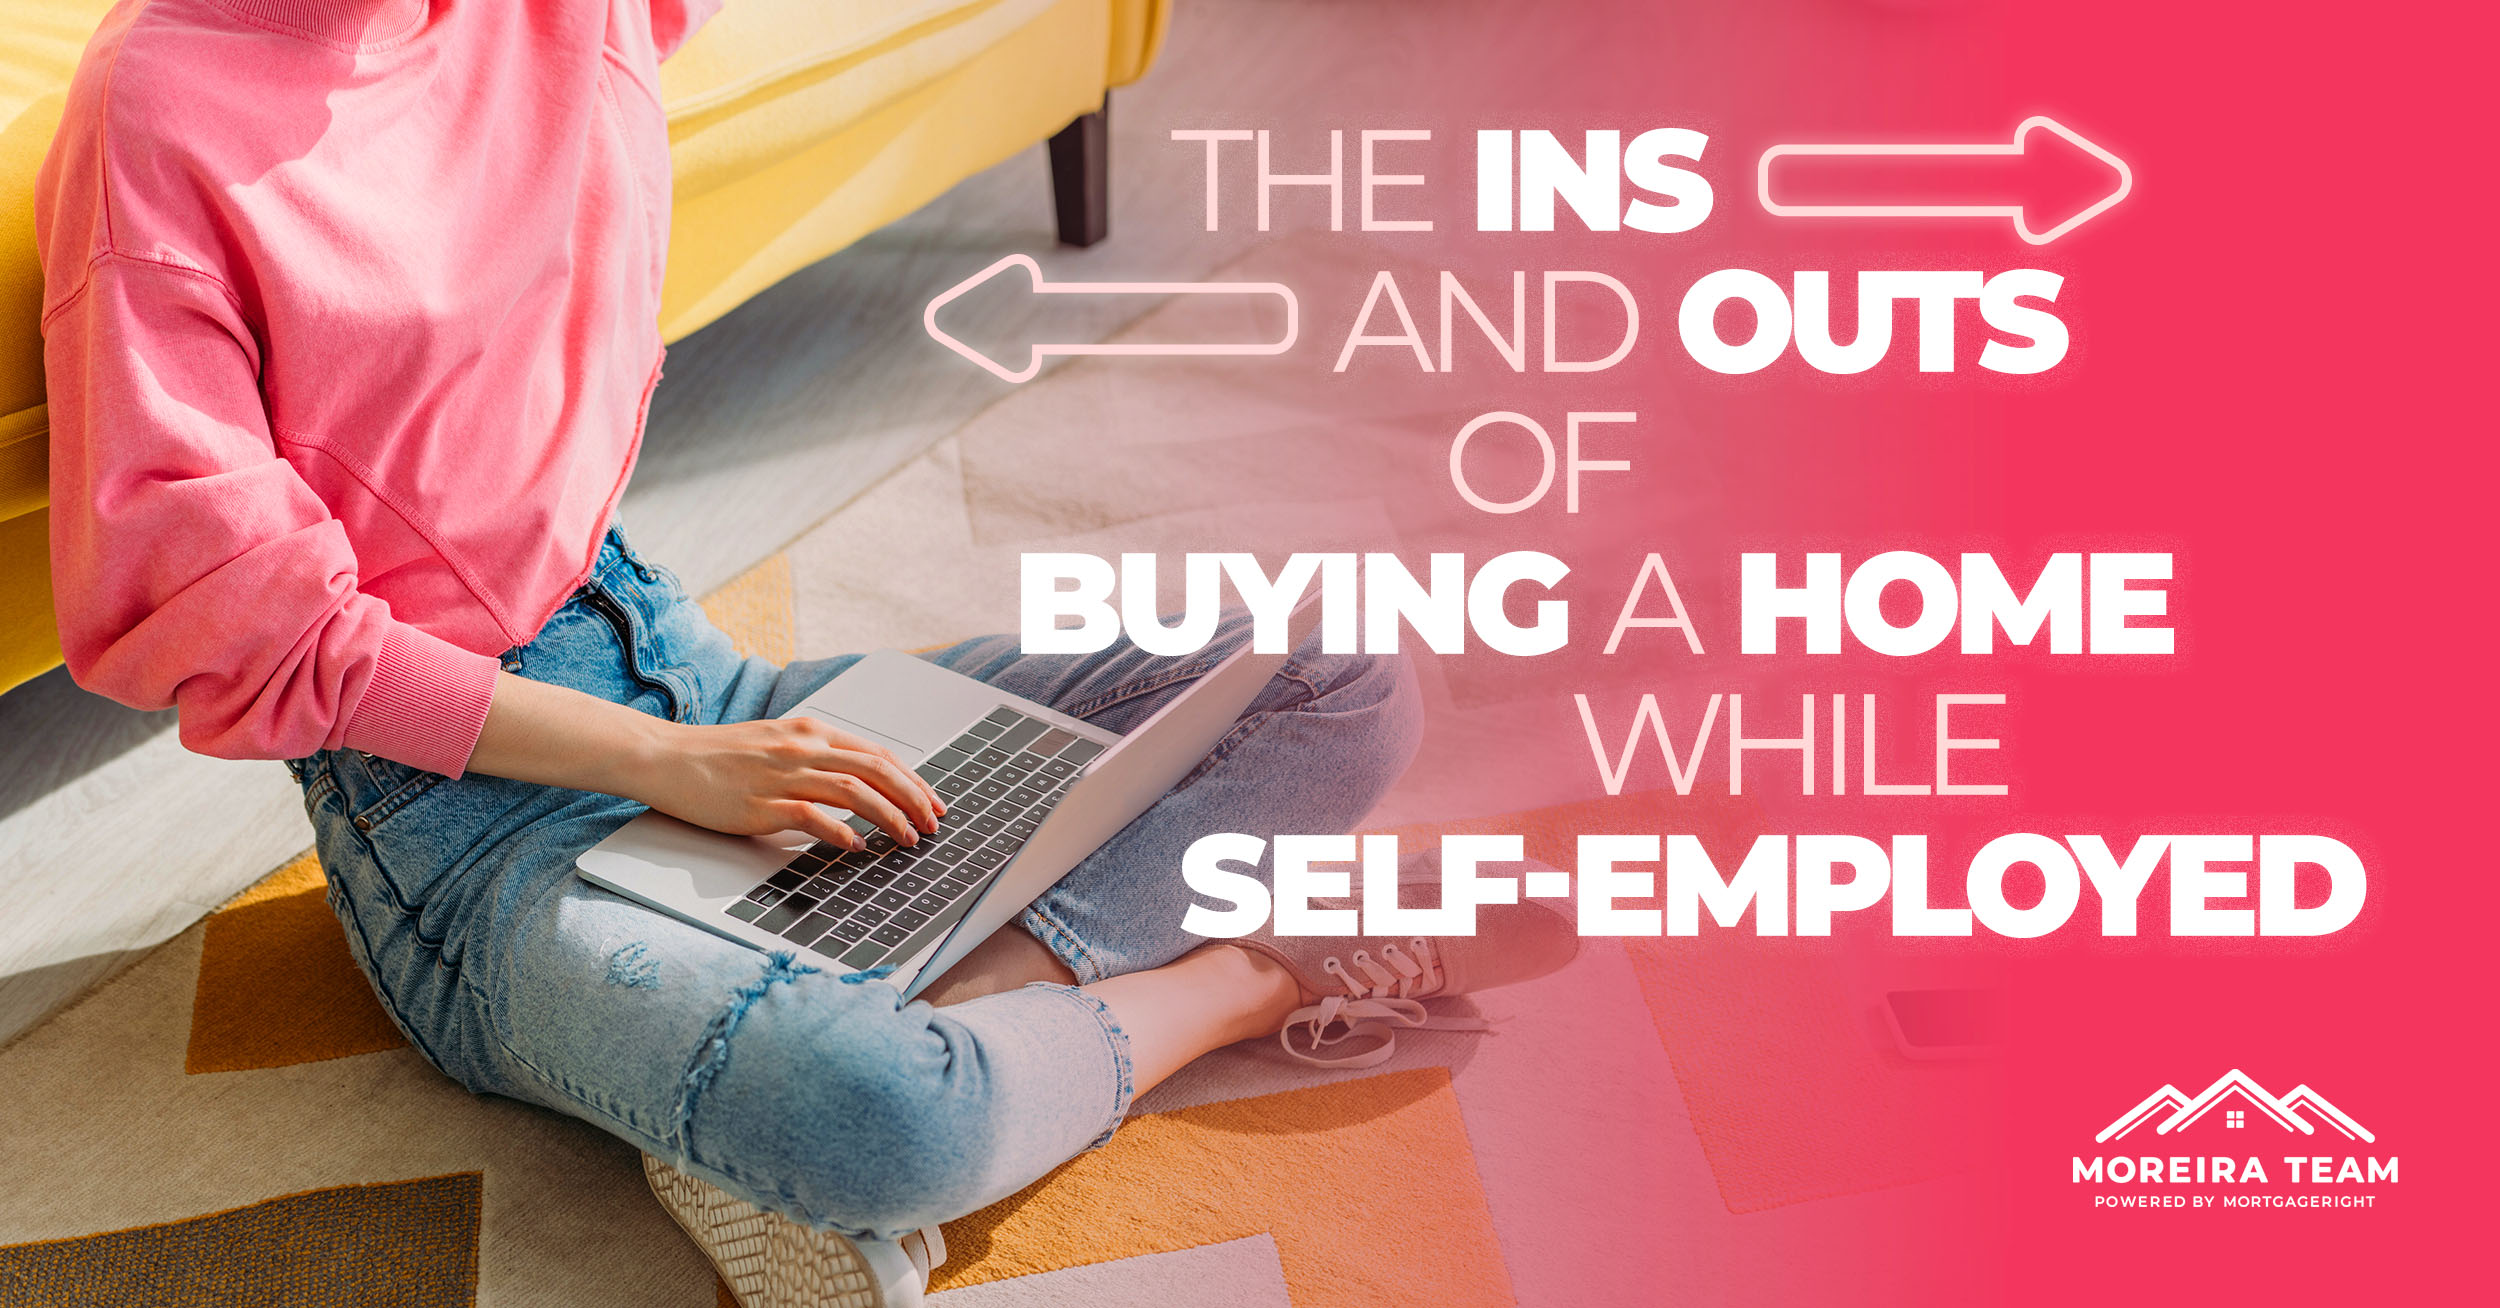 The Ins and Outs of Buying a Home While Self-Employed